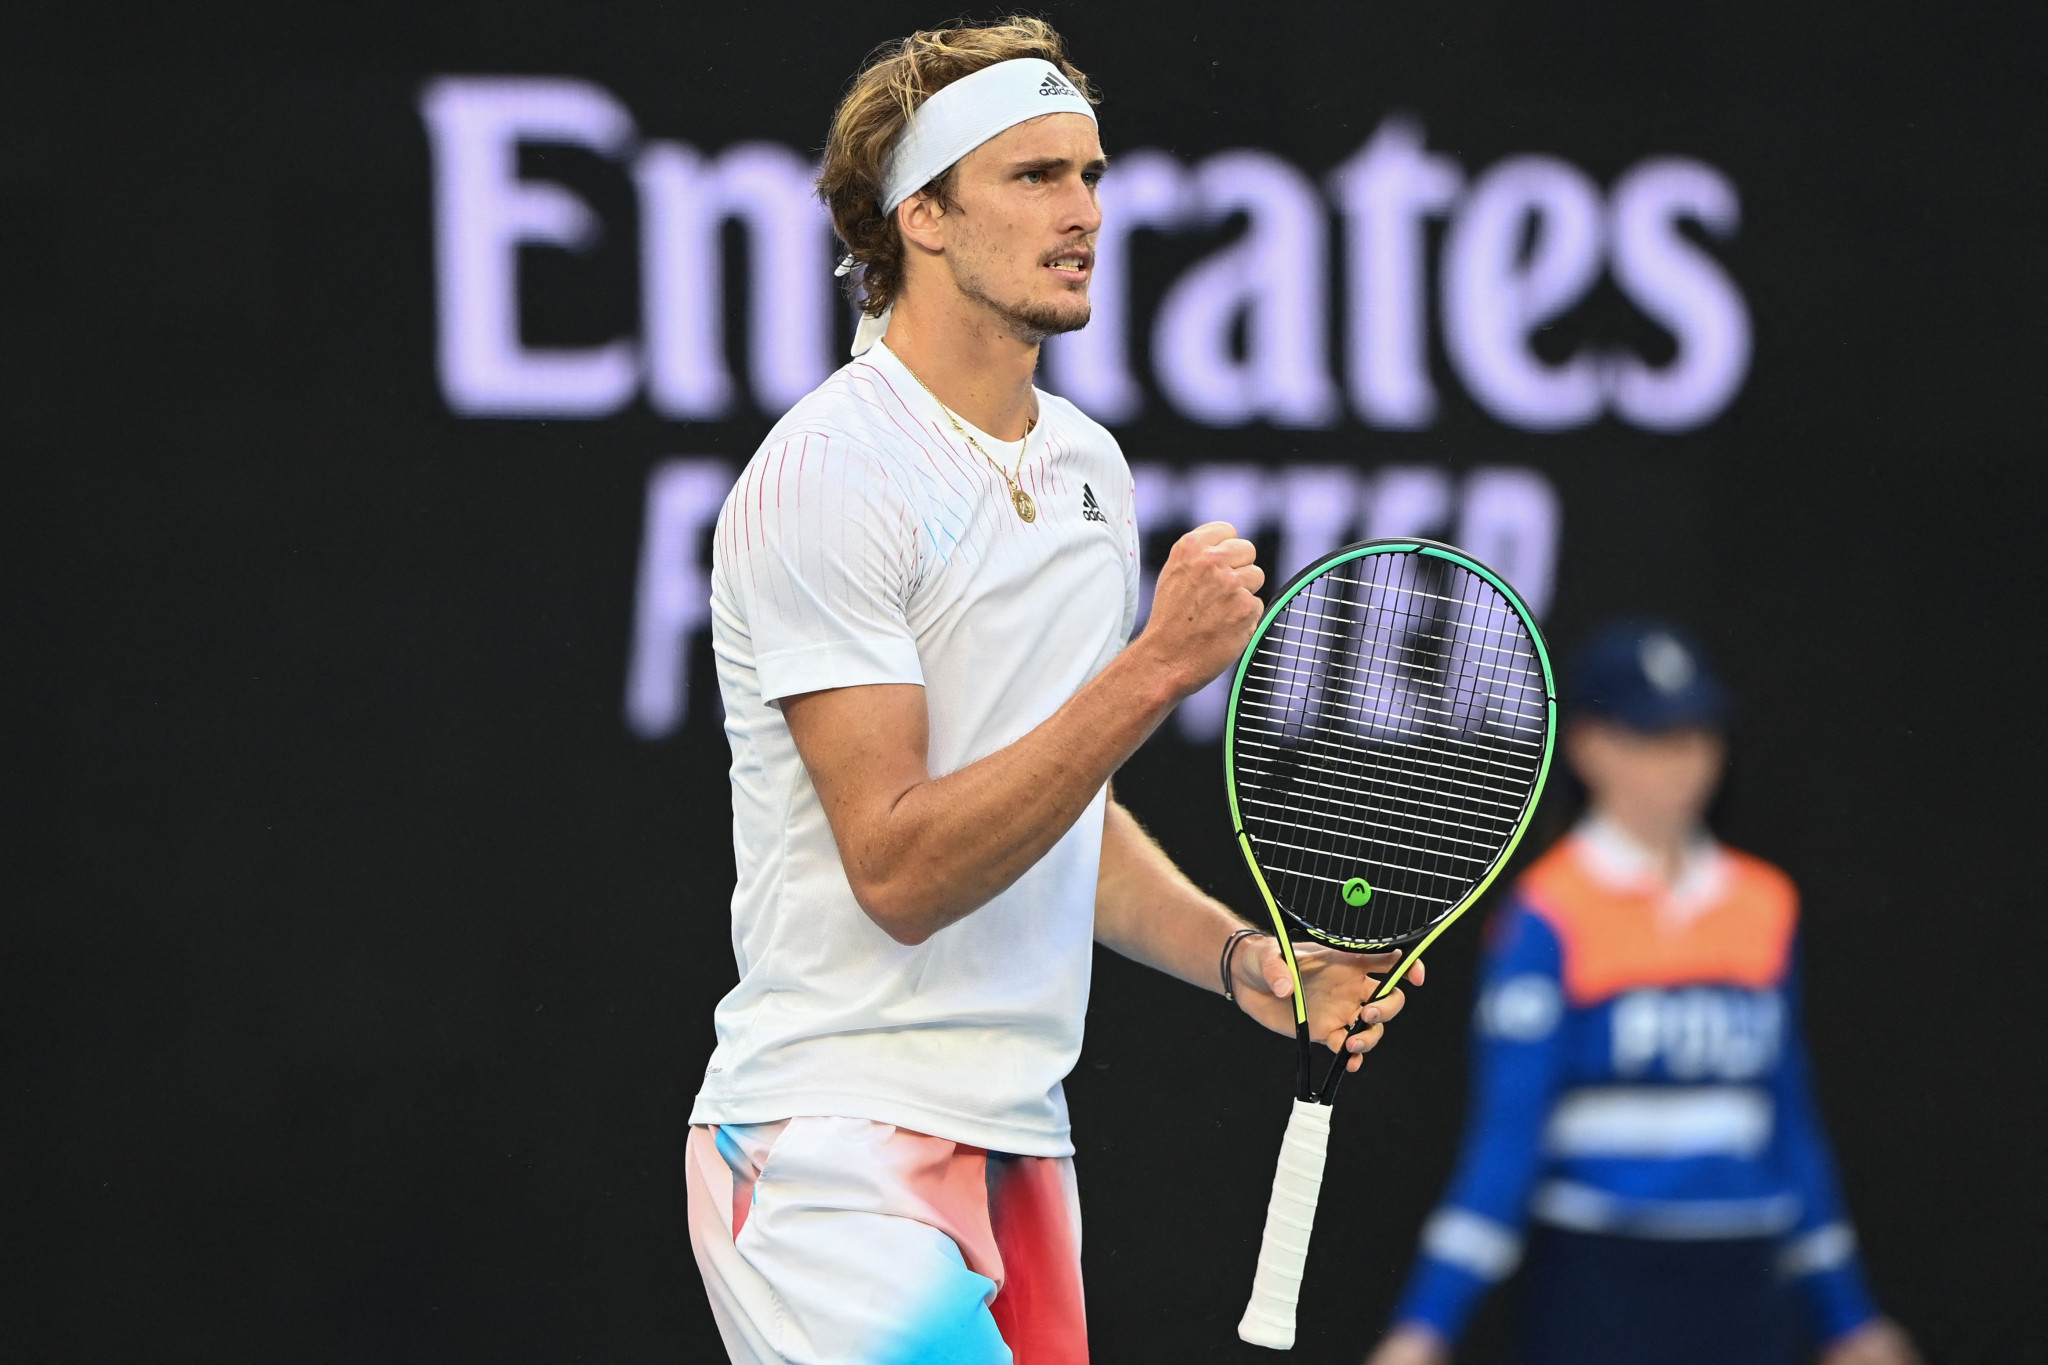 Alexander Zverev is among the players to have questioned the amount of testing at the tournament ©Getty Images